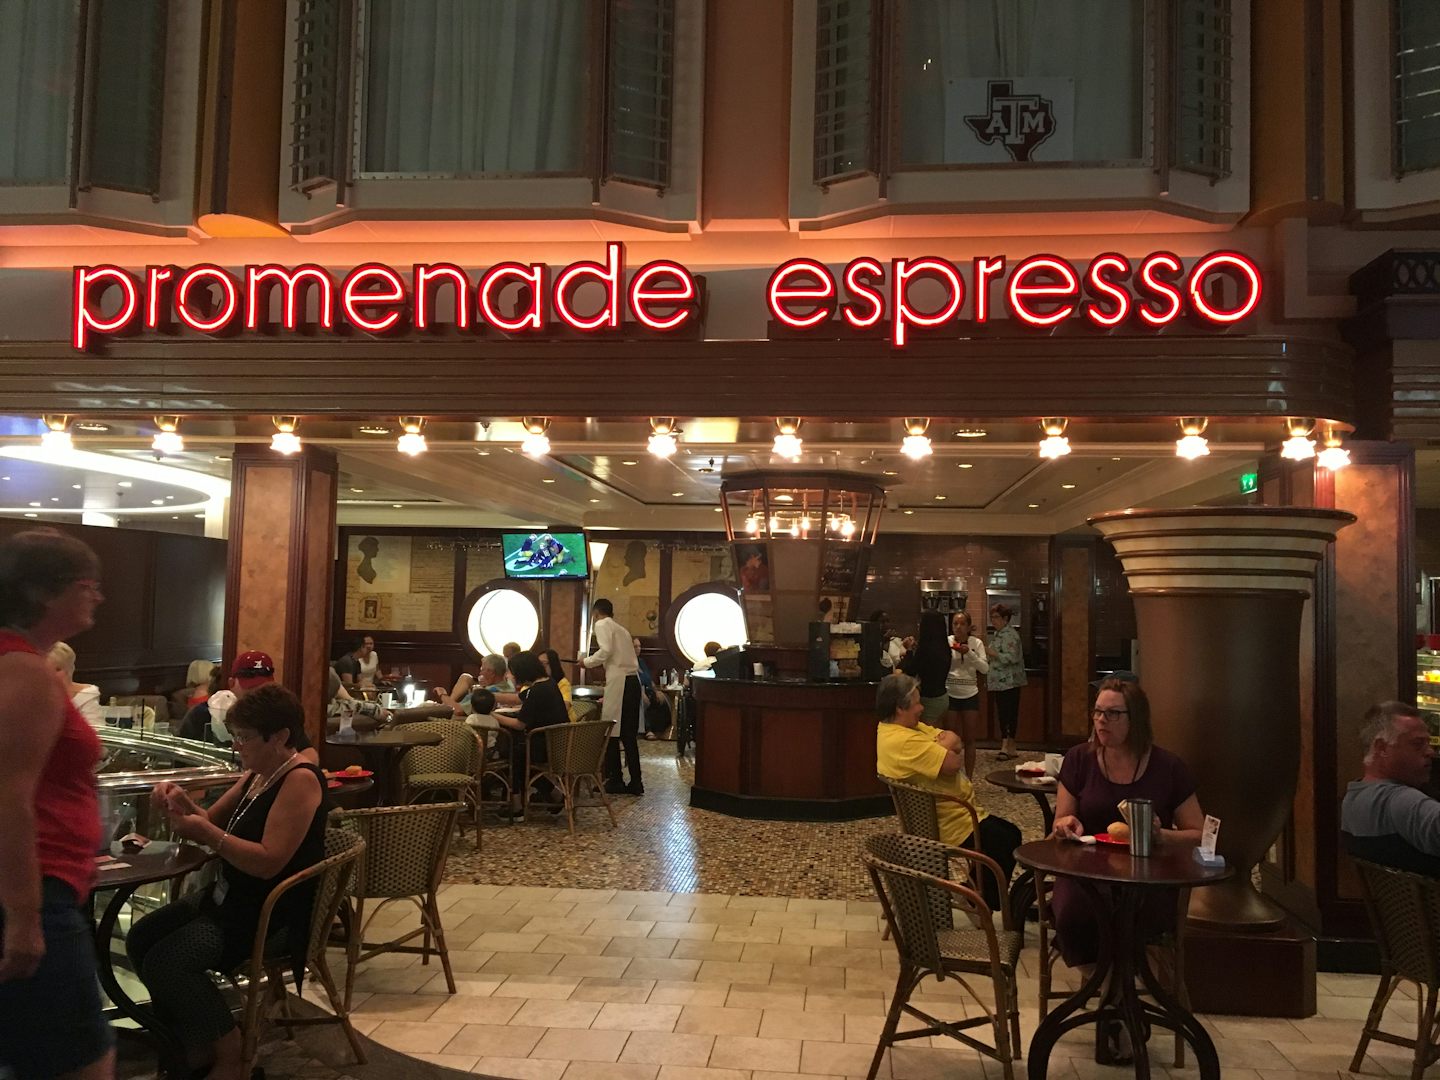 Cafe with coffee, continental breakfast, sandwiches, desserts